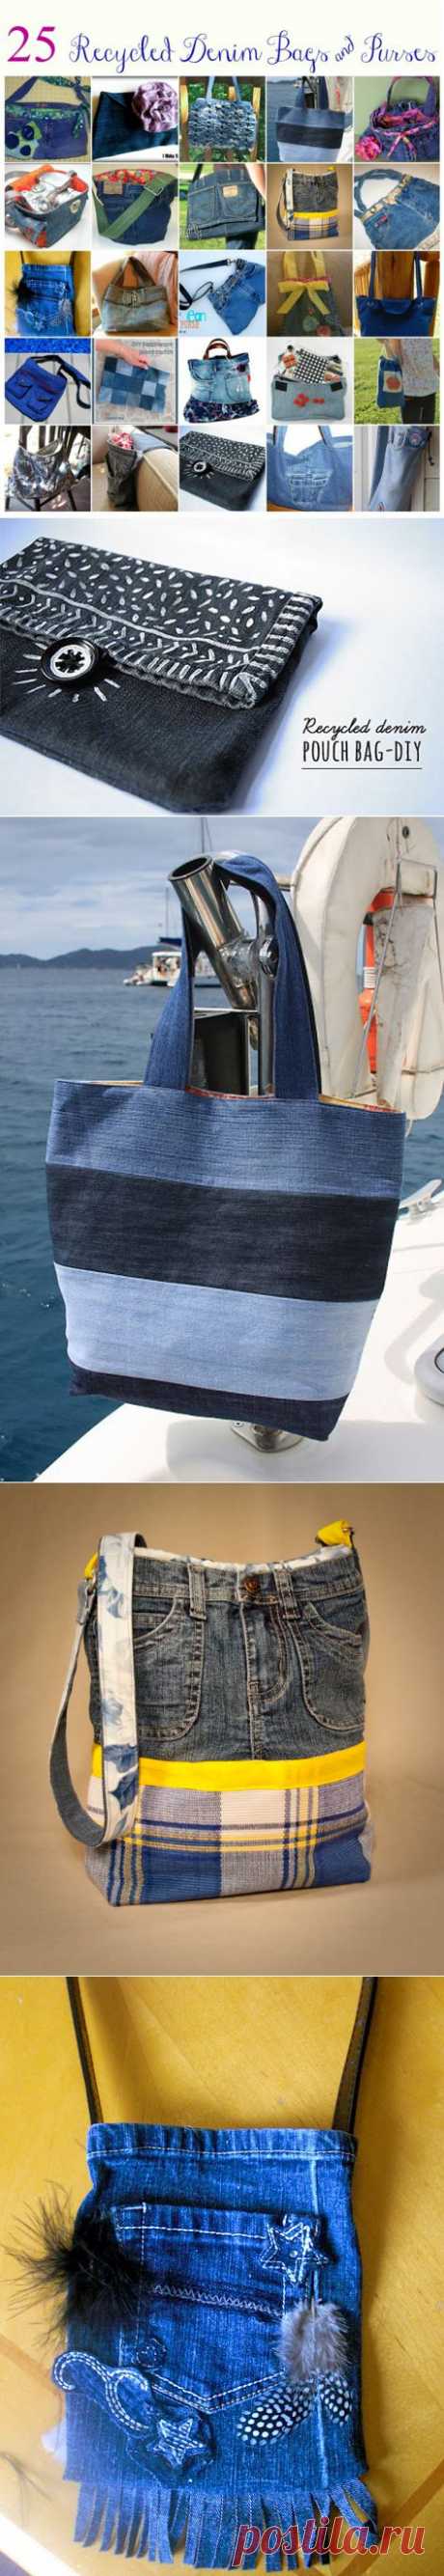 25 Recycled Denim Purses and Bags Tutorials Made From Jeans